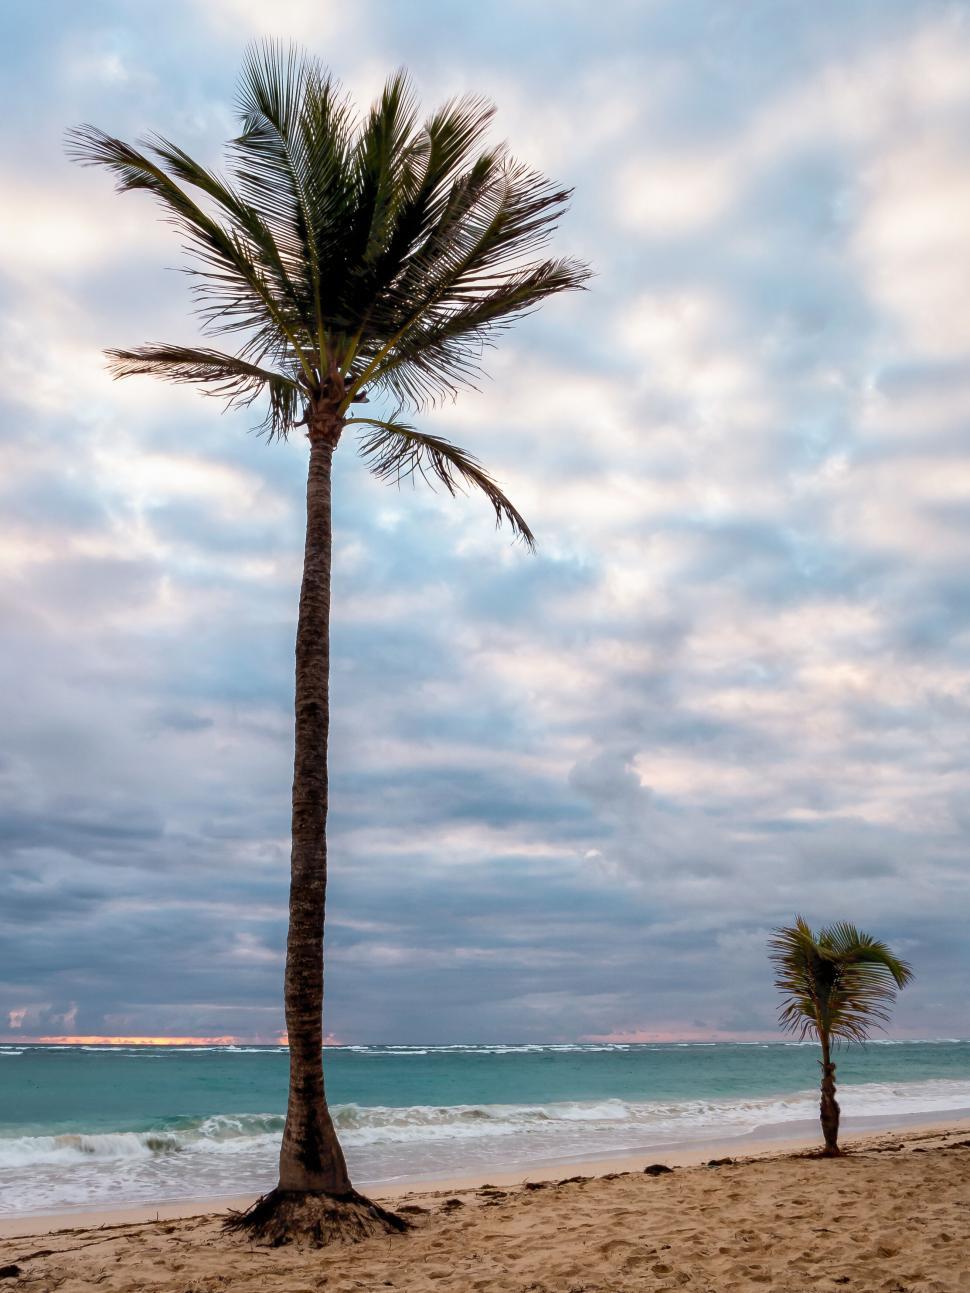 Free Image of Beach scene with two palm trees against cloudy sky. 